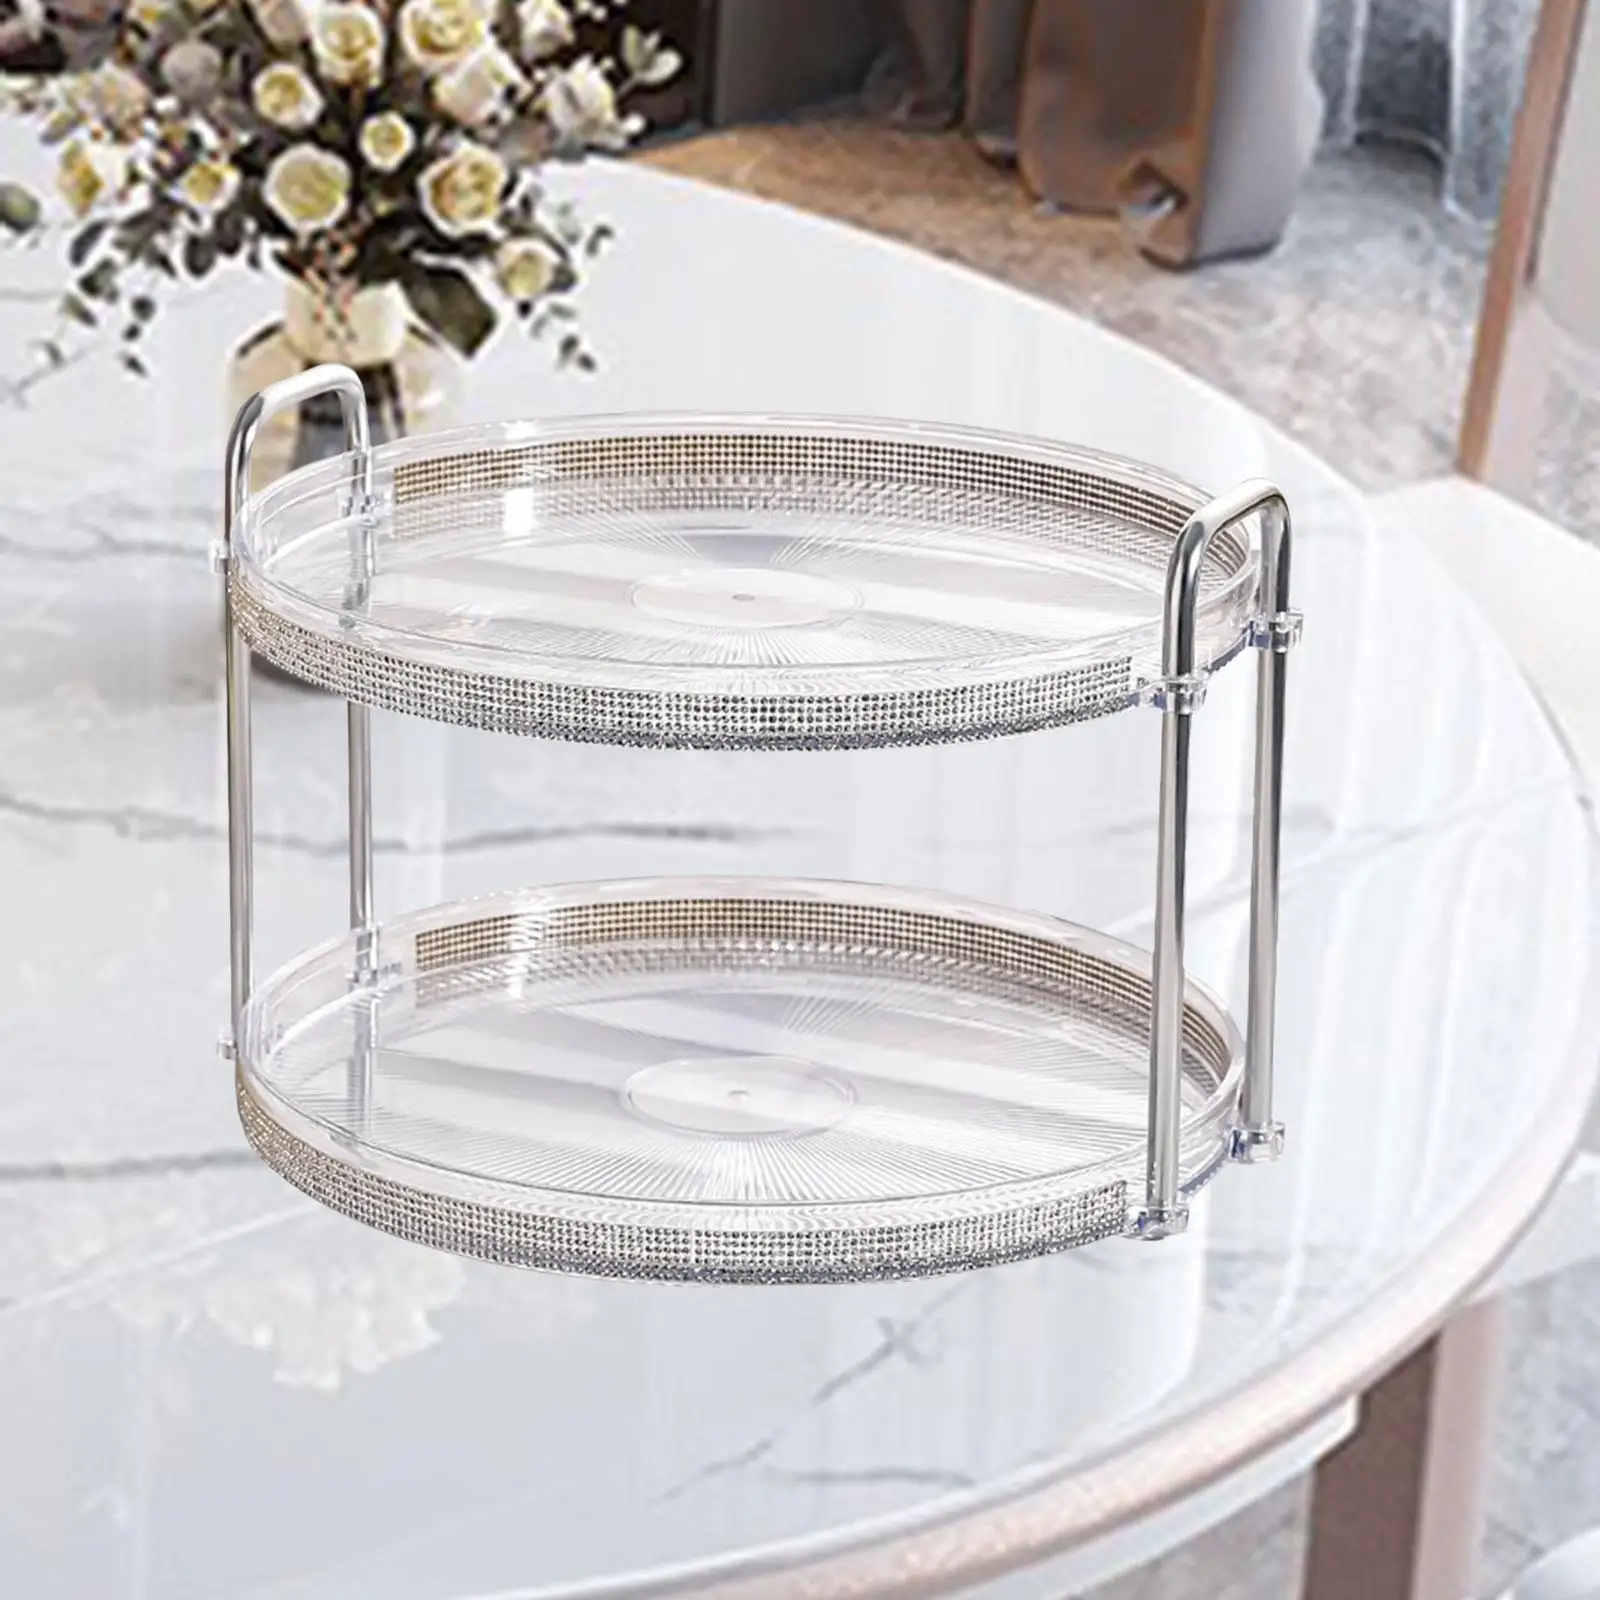 Decorative Round Serving Tray with Handles Dessert Fruits Snack Serving Plate Vanity Tray Makeup Organizer for Cupcake Display